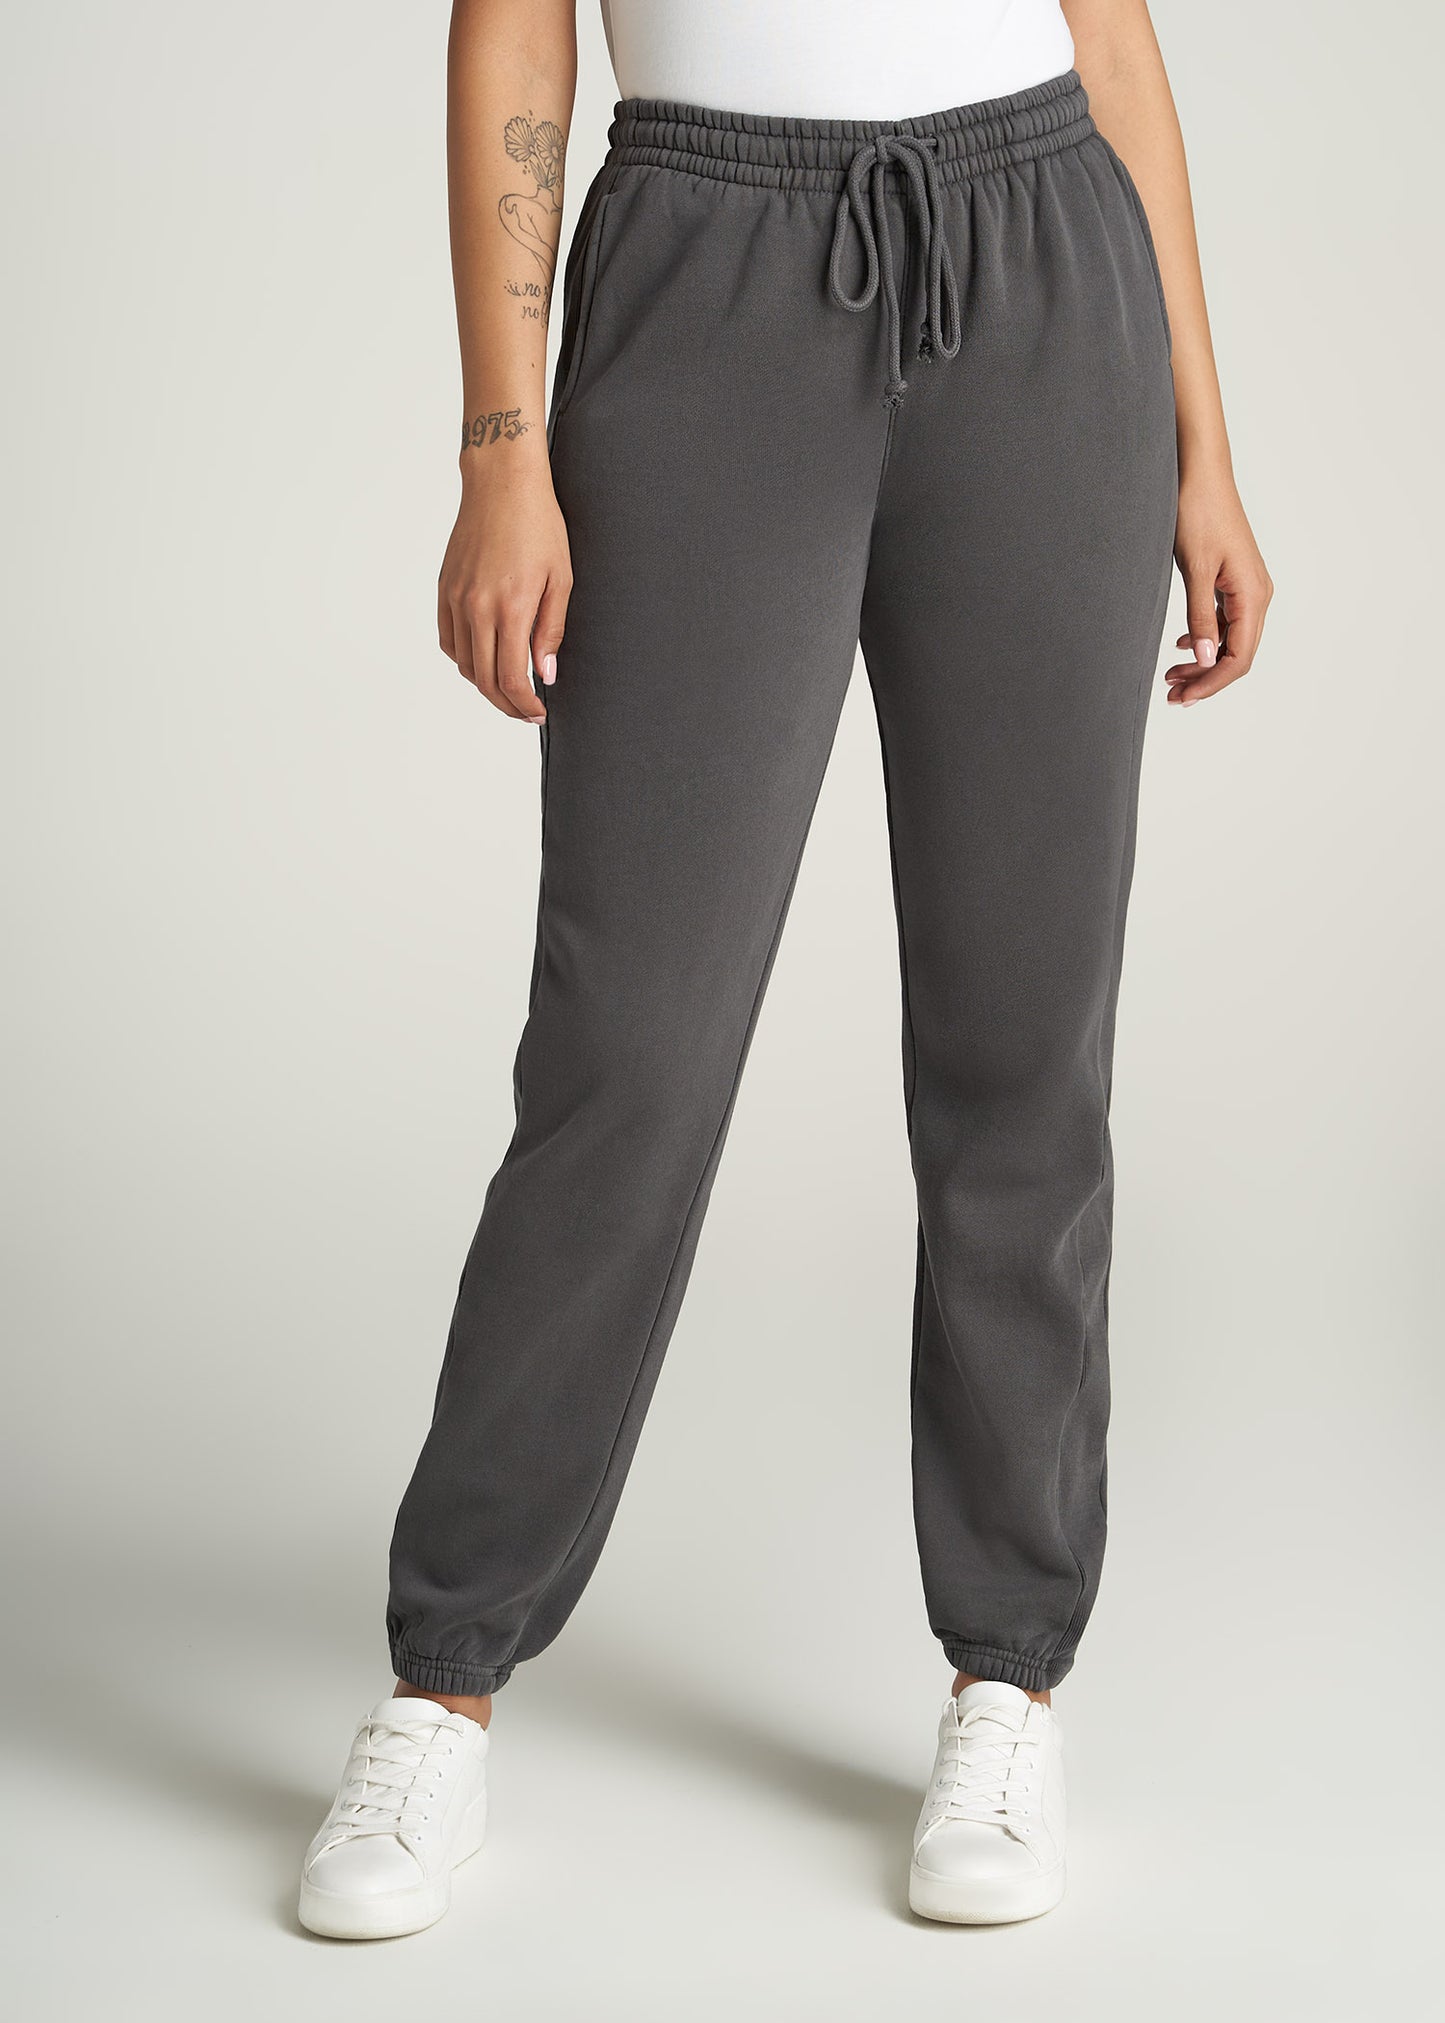 Bestselling Sweatpants for Women: 10 Warm & Comfortable Winter Sweatpants  You Need to Order Now, Shopping Guides